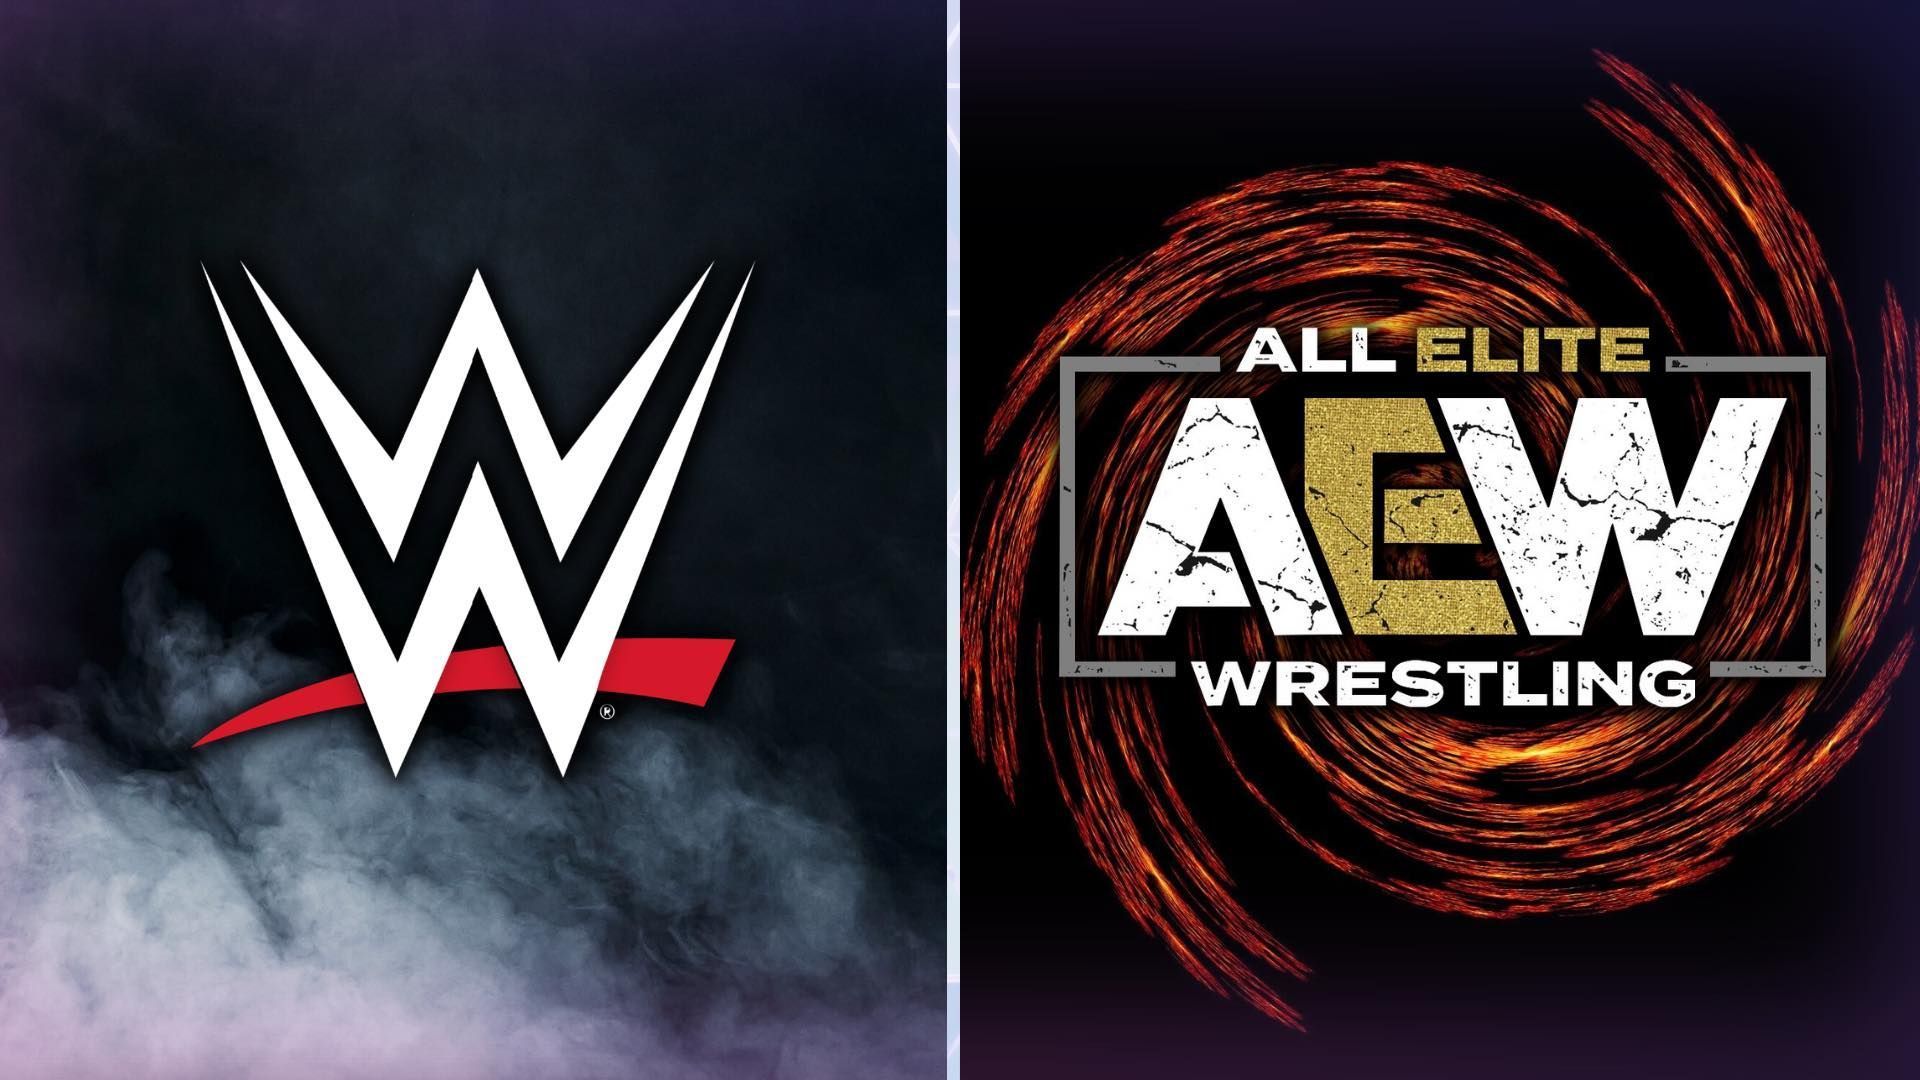 Both AEW and WWE have their strengths and weaknesses